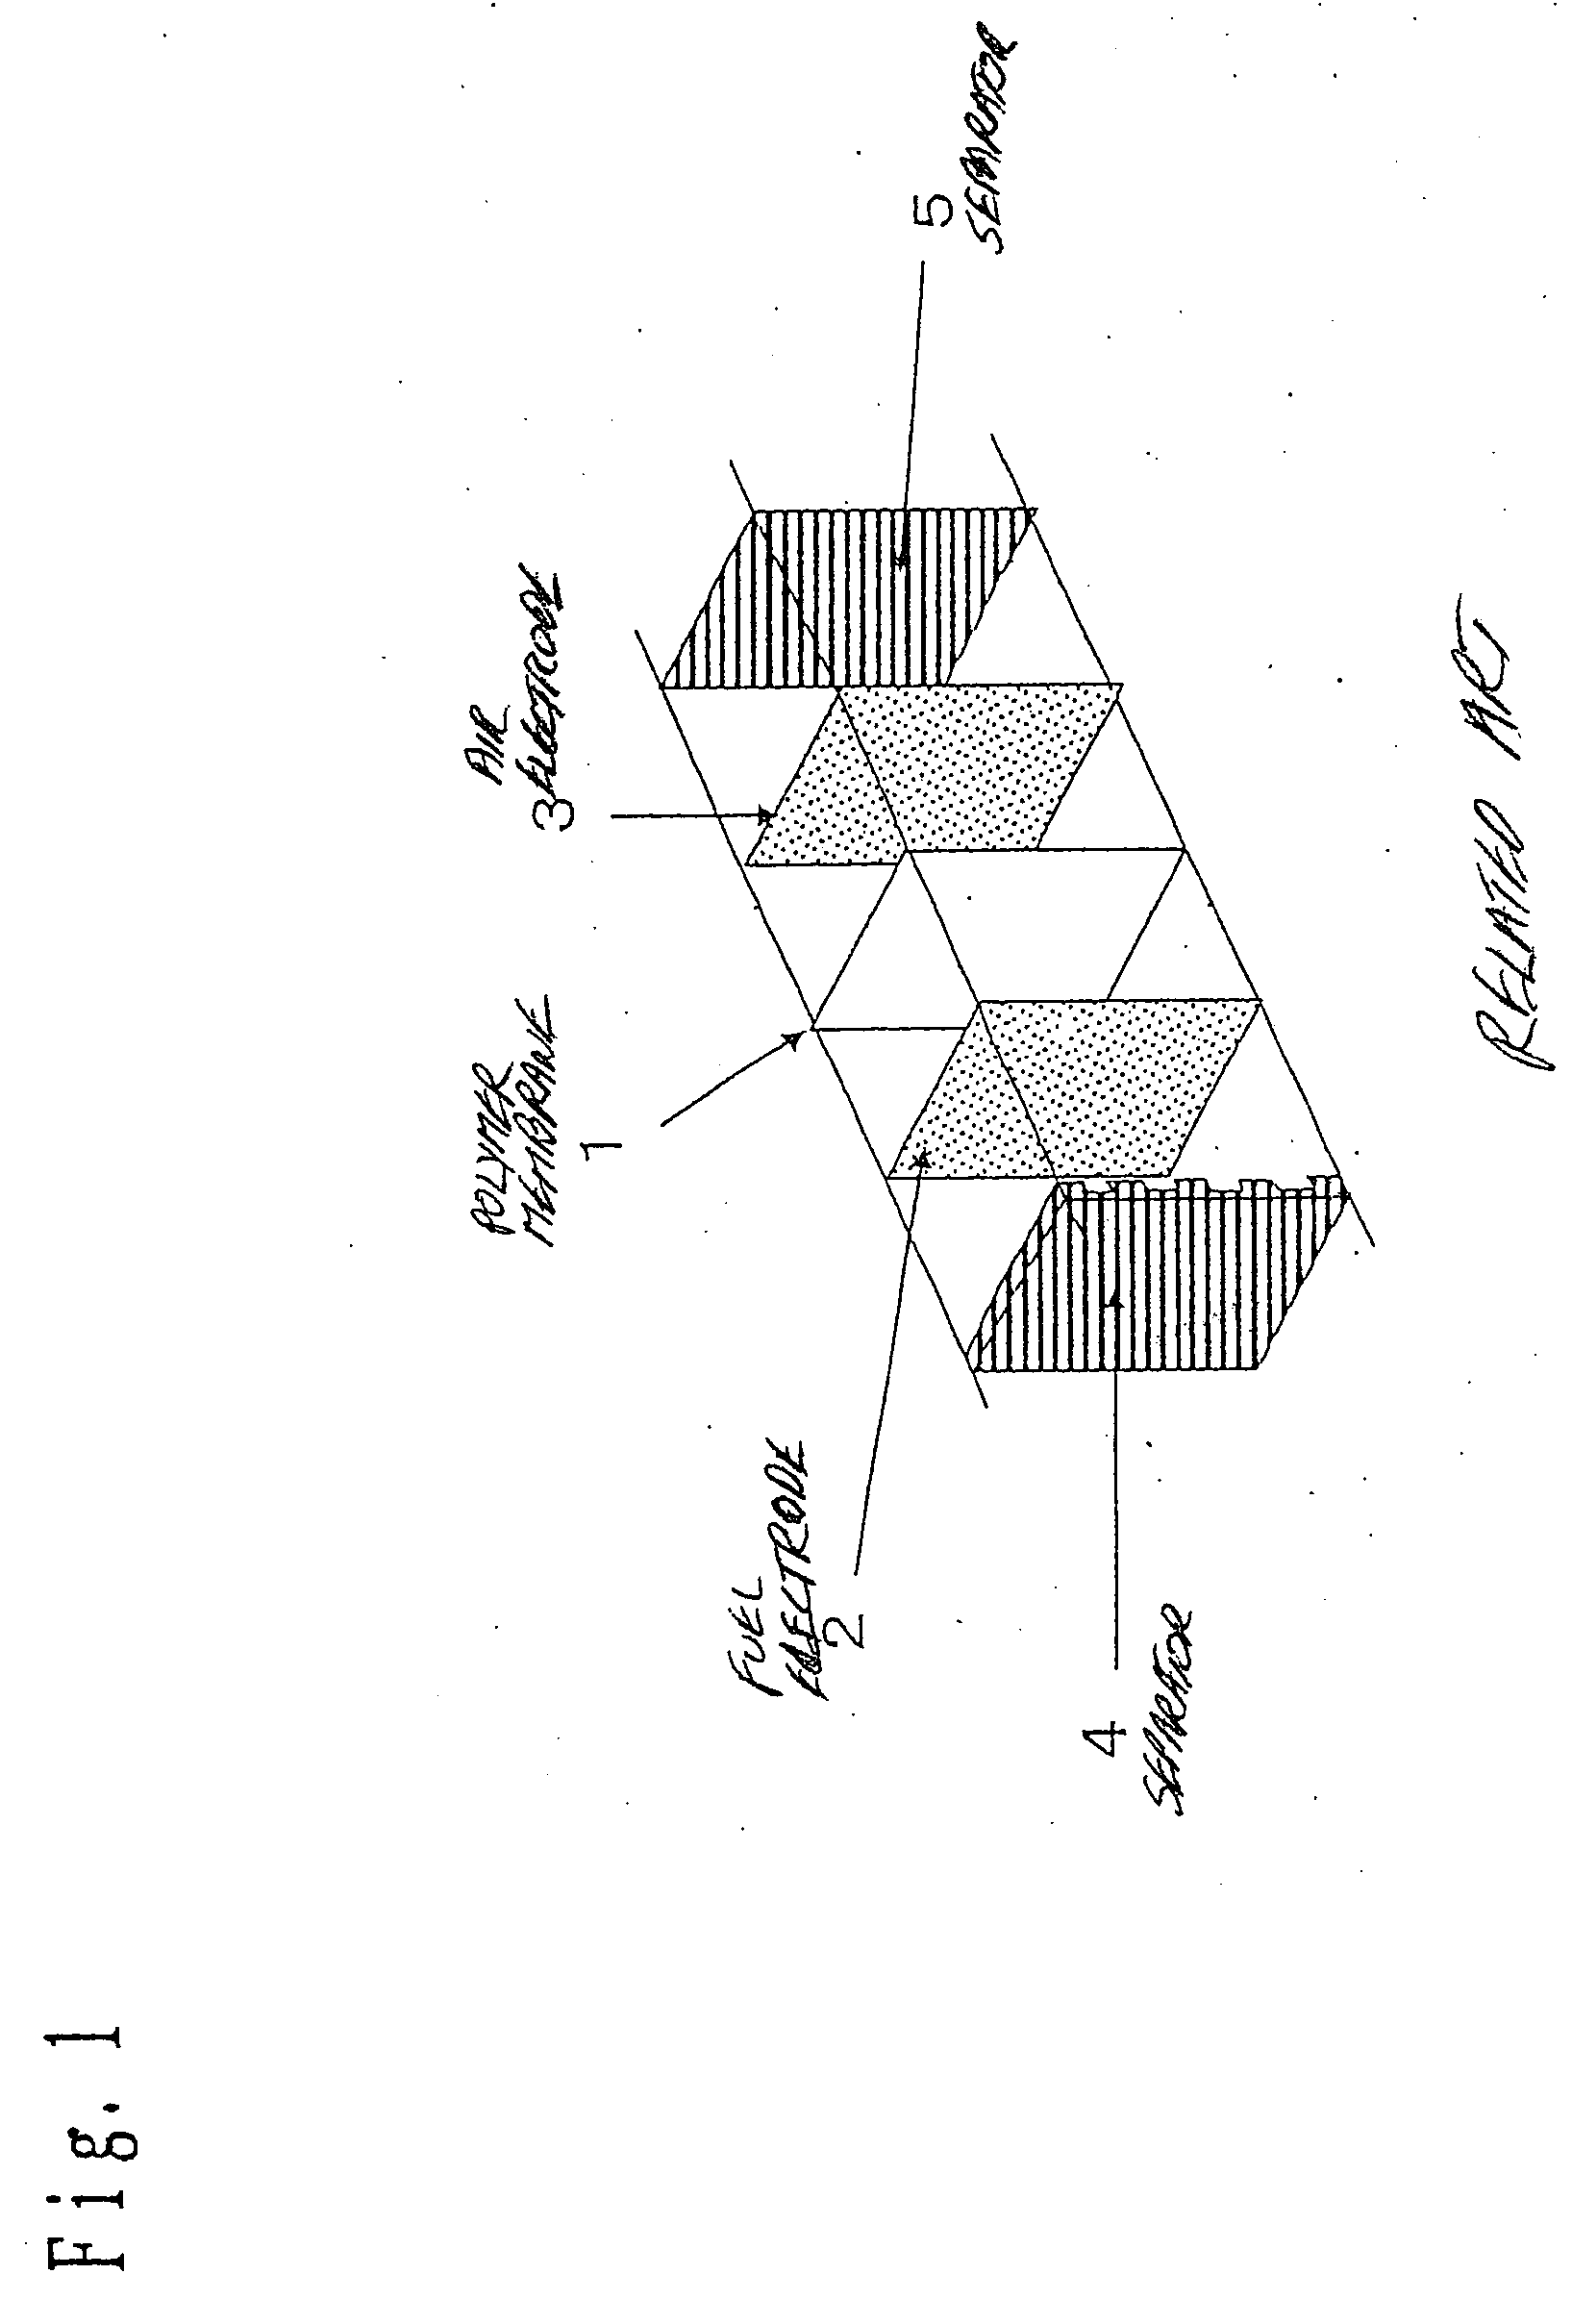 Polymer electrolyte fuel cell, fuel cell electrode, method for producing electrode catalyst layer, and method for producing polymer electrolyte fuel cell